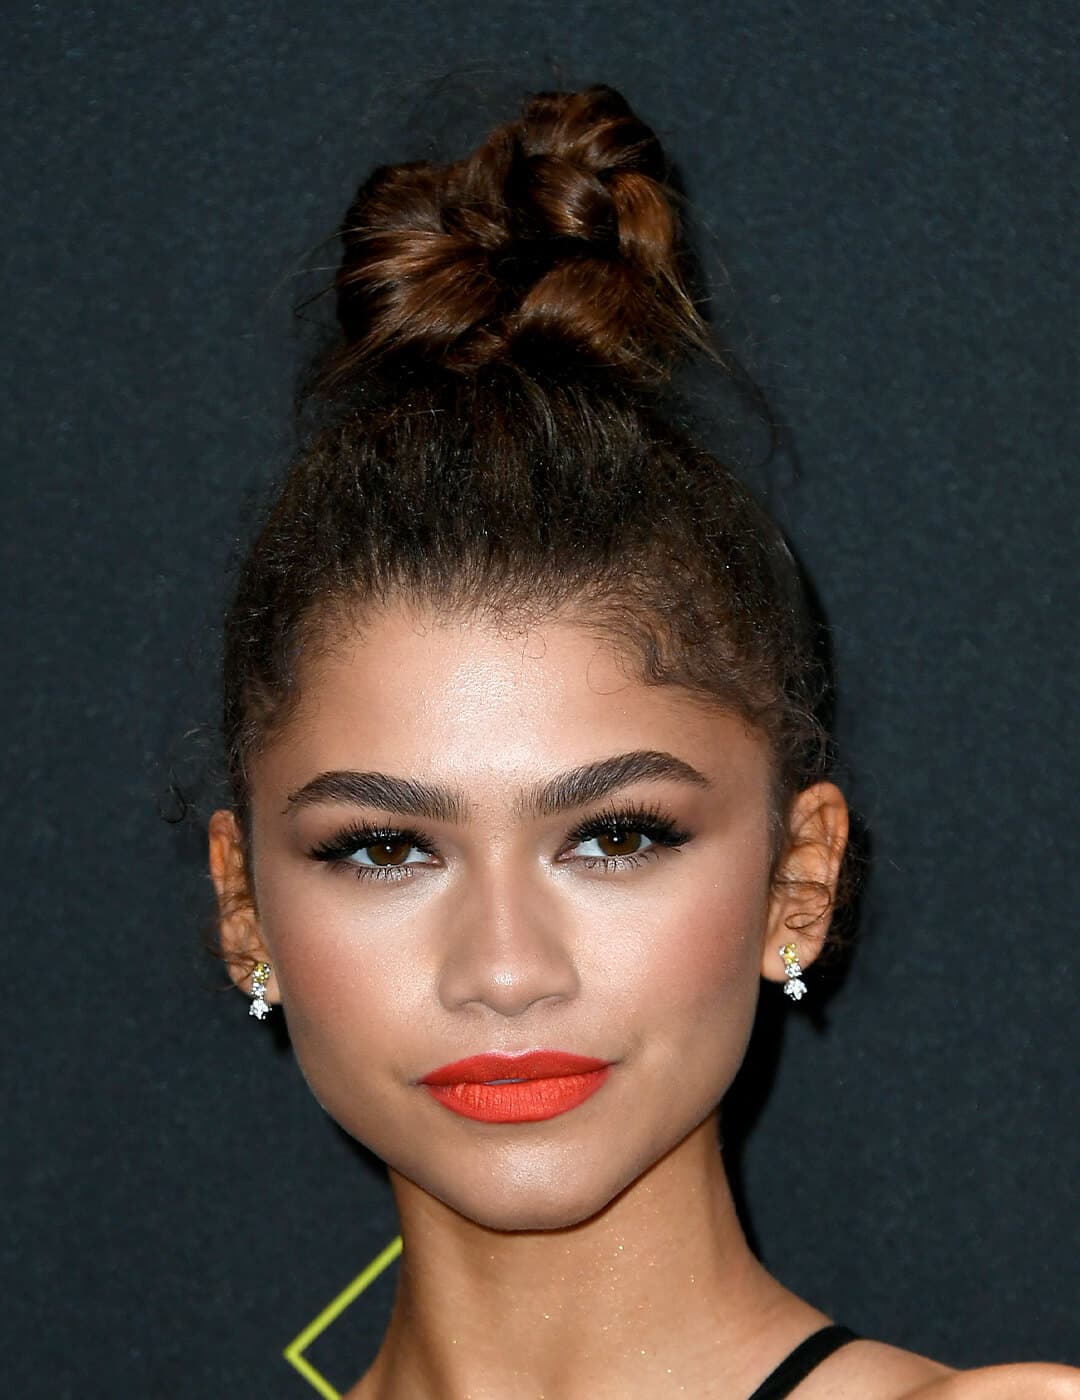 Zendaya looking glam in a top knot hairstyle paired with a bold coral lipstick